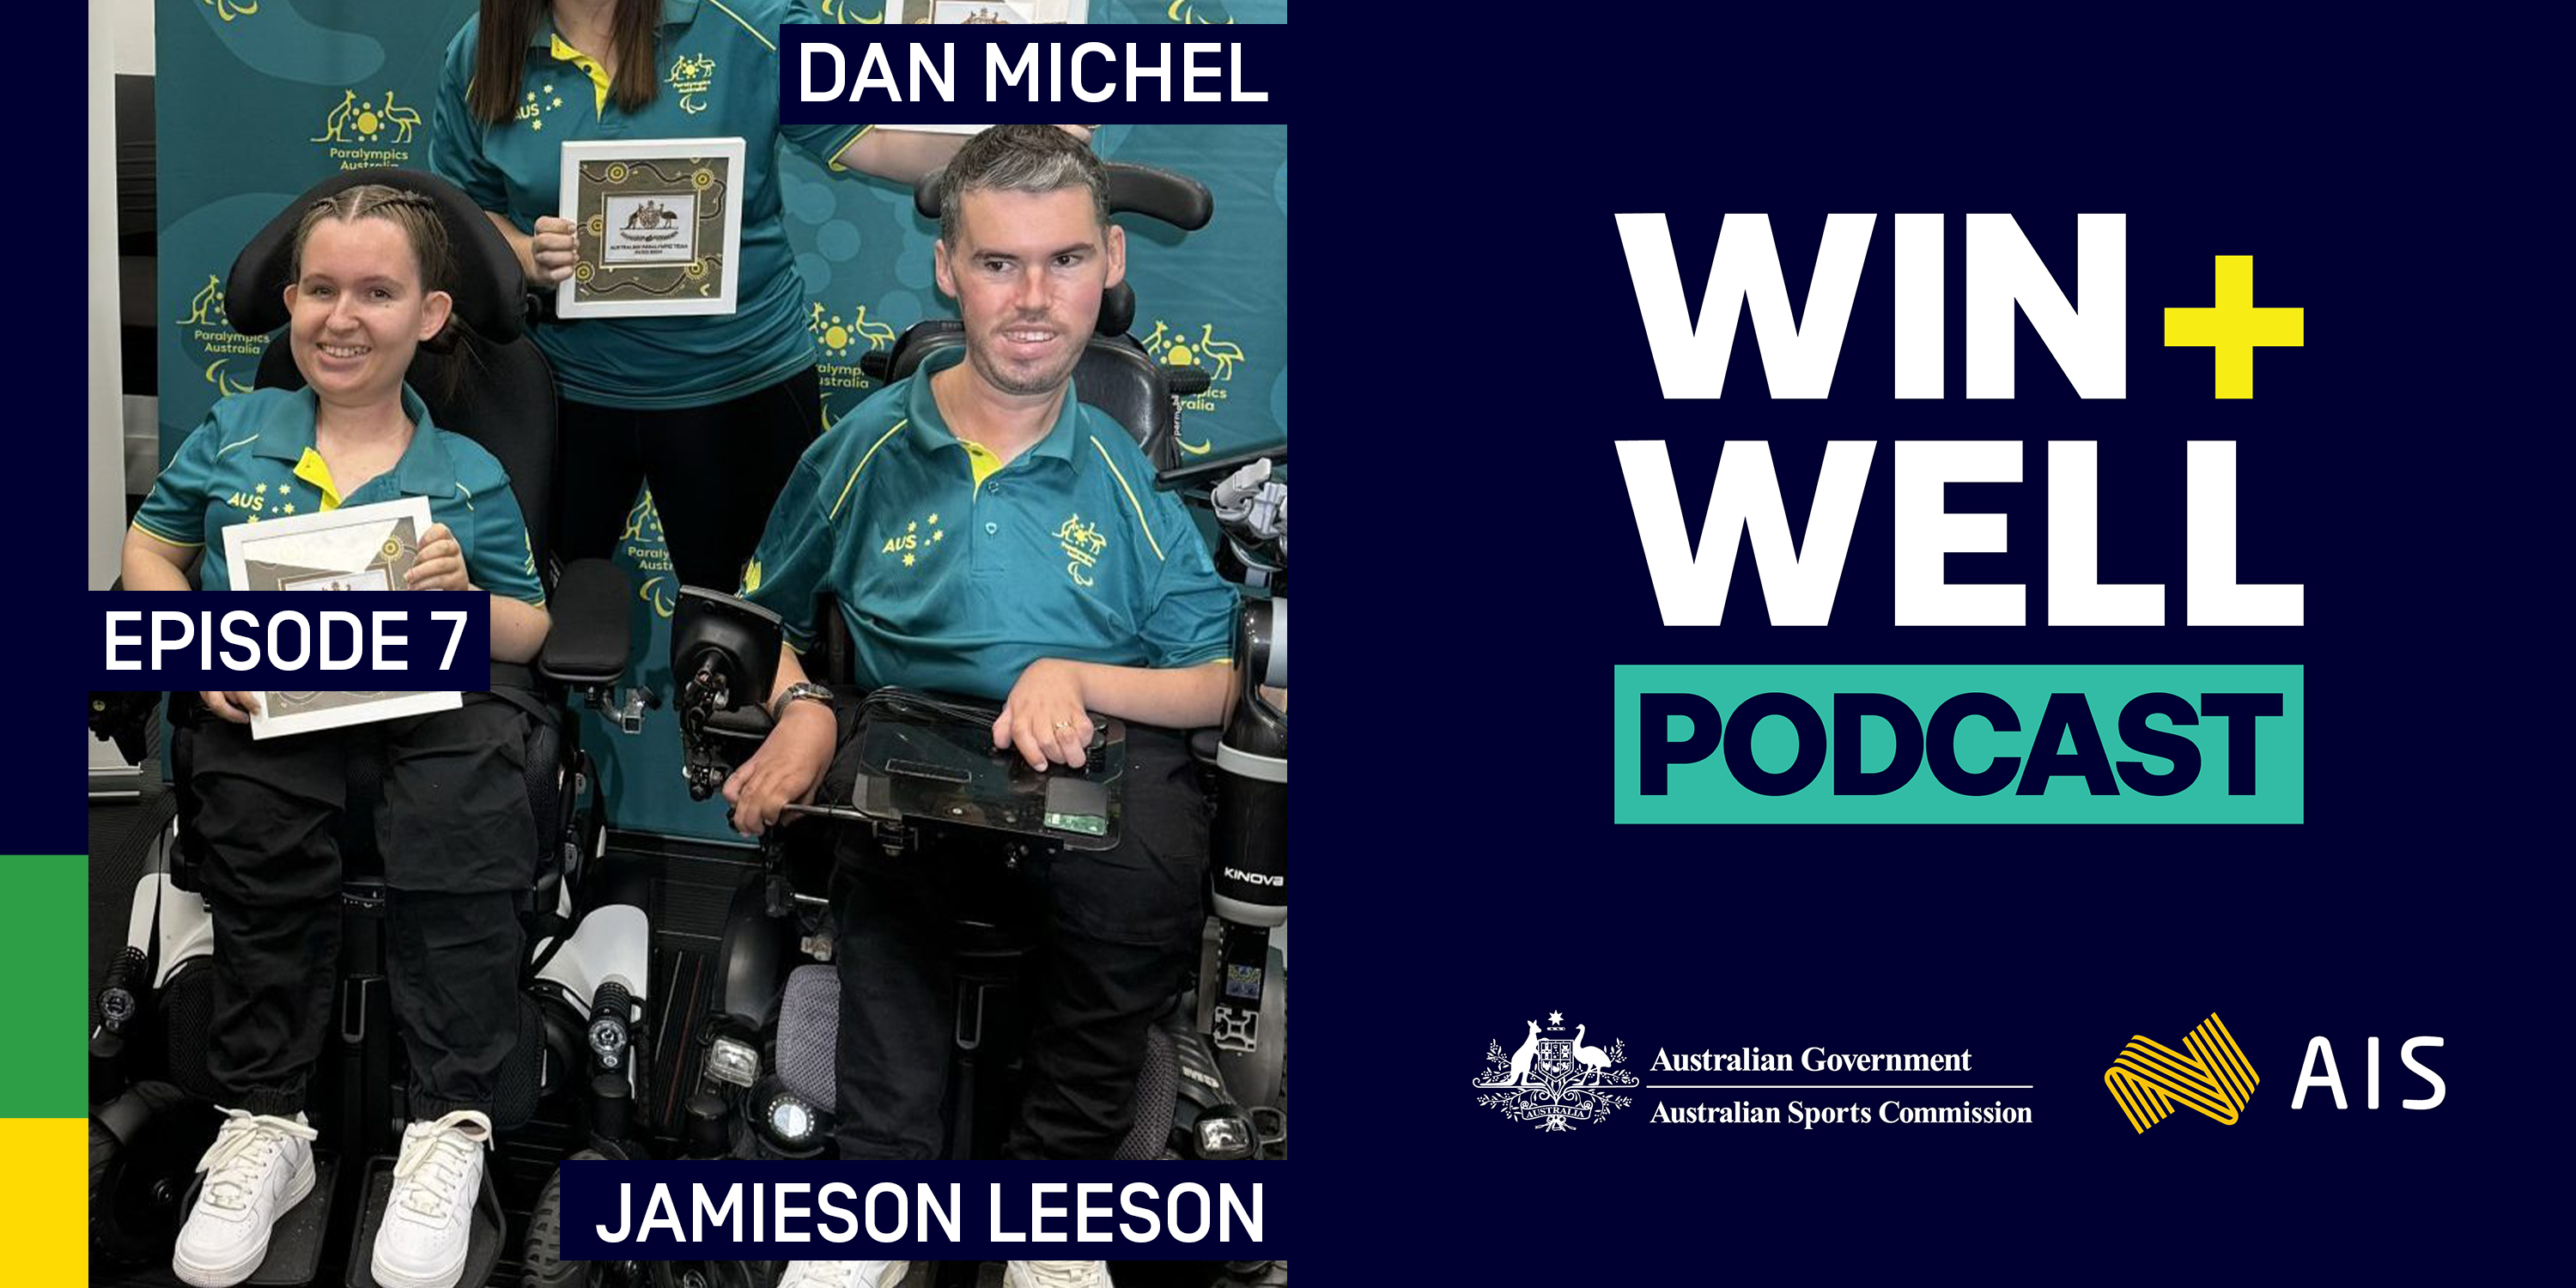 Win Well Podcast with Daniel Michel and Jamieson Lee